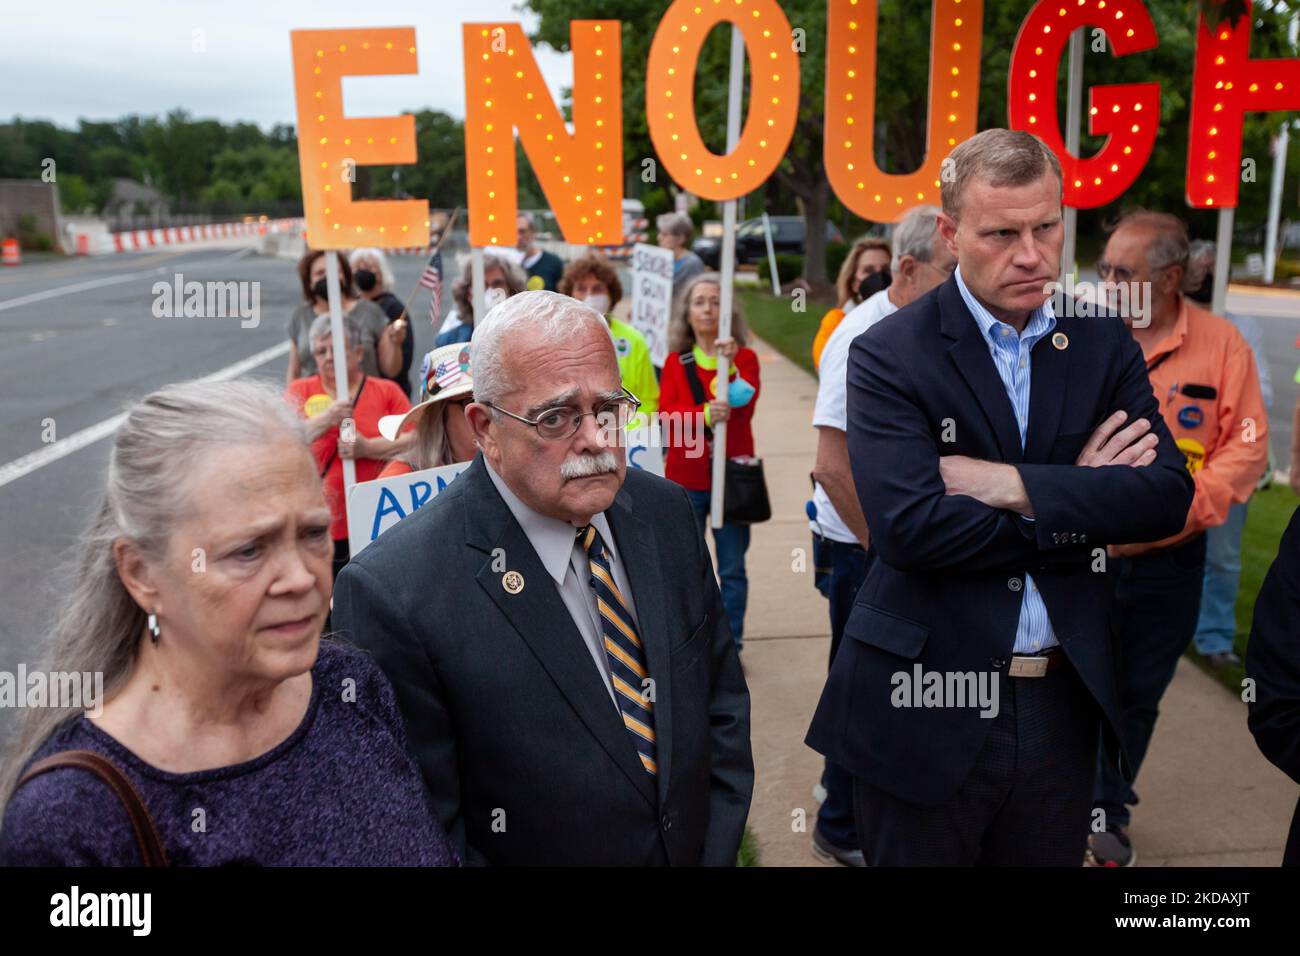 Congressman Gerry Connolly (D-VA) (center) attends a candlelight vigil in Fairfax, VA, for the victims of the Uvalde and Buffalo massacres, May 25, 2022. On May 24, a gunman entered Robb Elementary school and killed 19 students and 2 teachers in the worst school shooting since Sandy Hook in 2012. Despite hundreds of mass shootings and thousands of gun-related deaths each year, Congress and the courts refuse to take action to stem the violence. (Photo by Allison Bailey/NurPhoto) Stock Photo